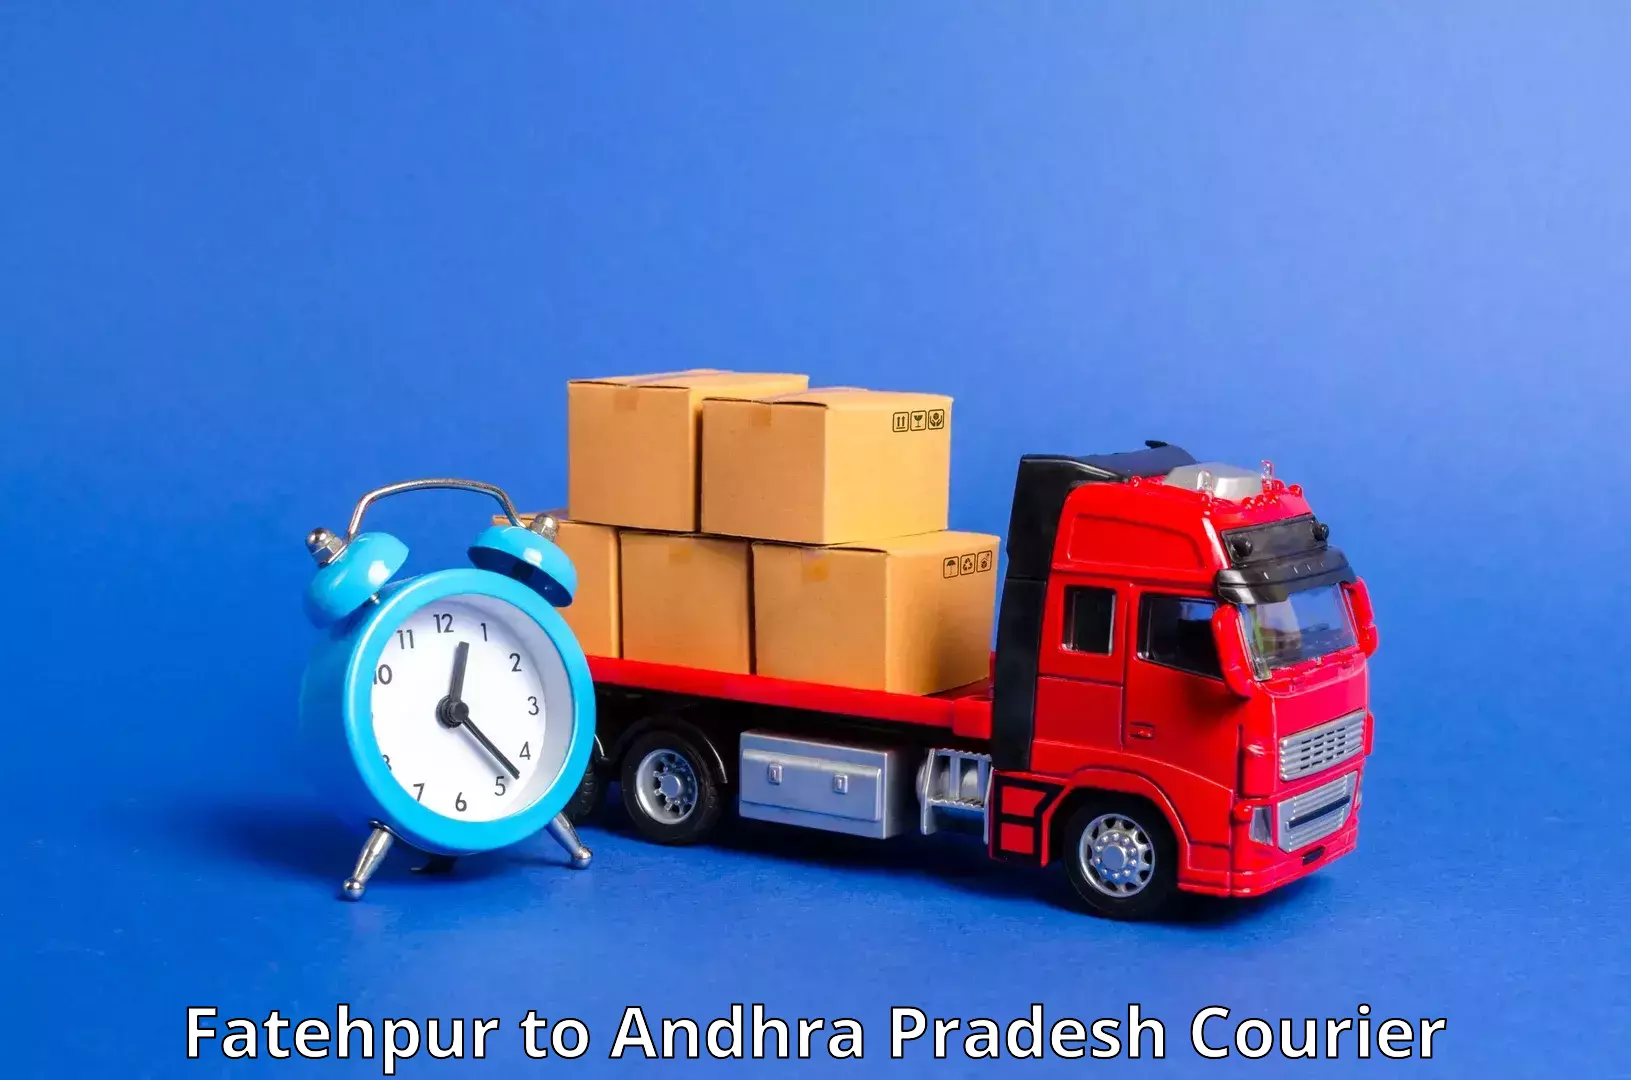 Courier service efficiency Fatehpur to Kurnool